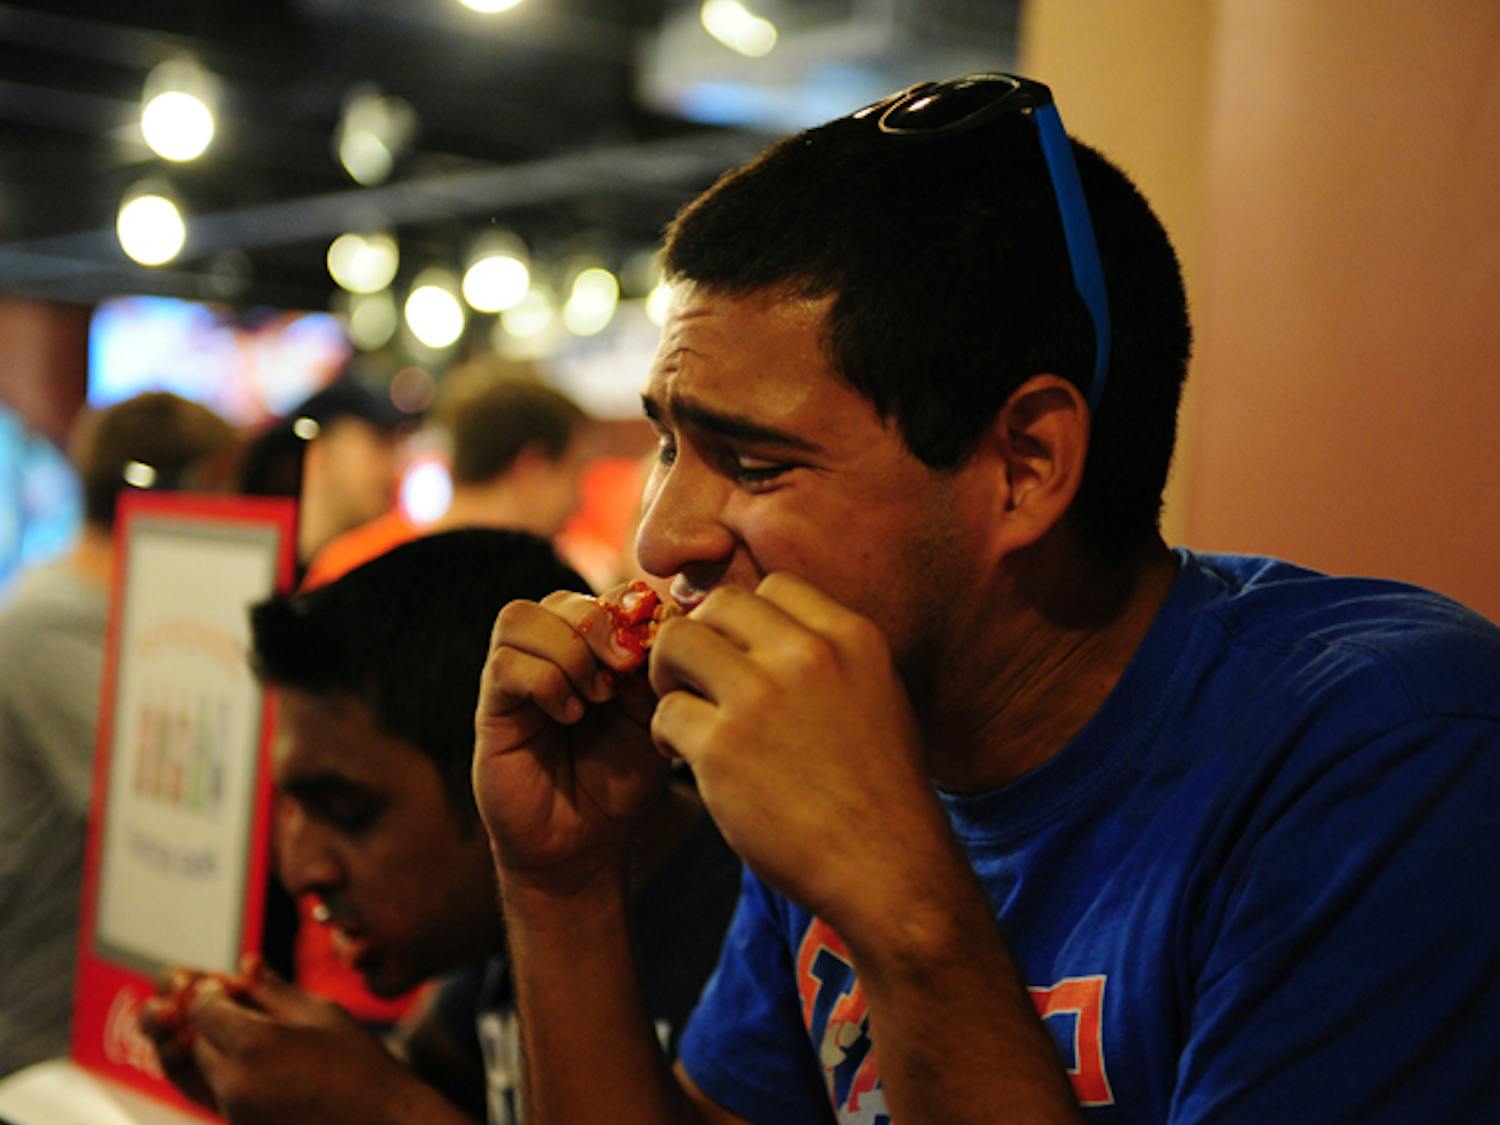 Jorge Araujo, a 21-year-old mechanical and aerospace engineering senior, and Amit Gupta, a Ph.D. candidate in electrical engineering, participate in the Munchies 420 ghost pepper chili wing eating challenge. Neither could finish his plate.